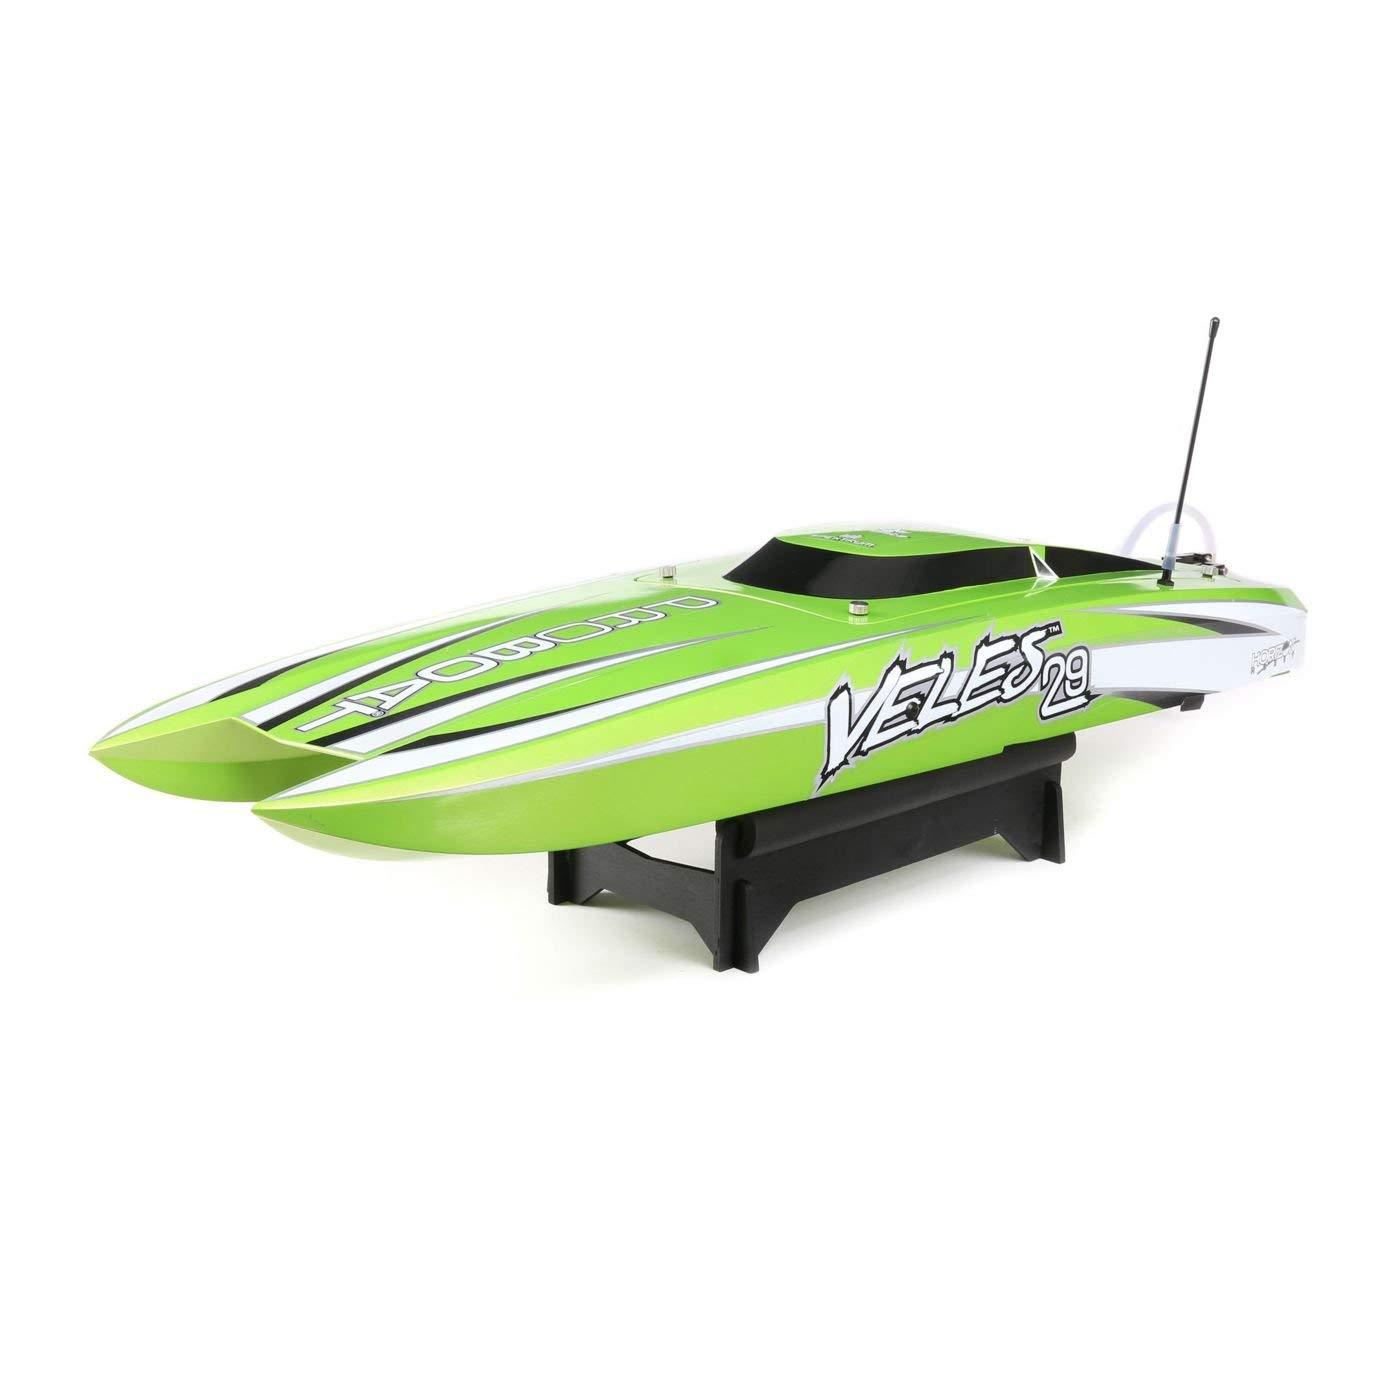 fastest rc boat out of box